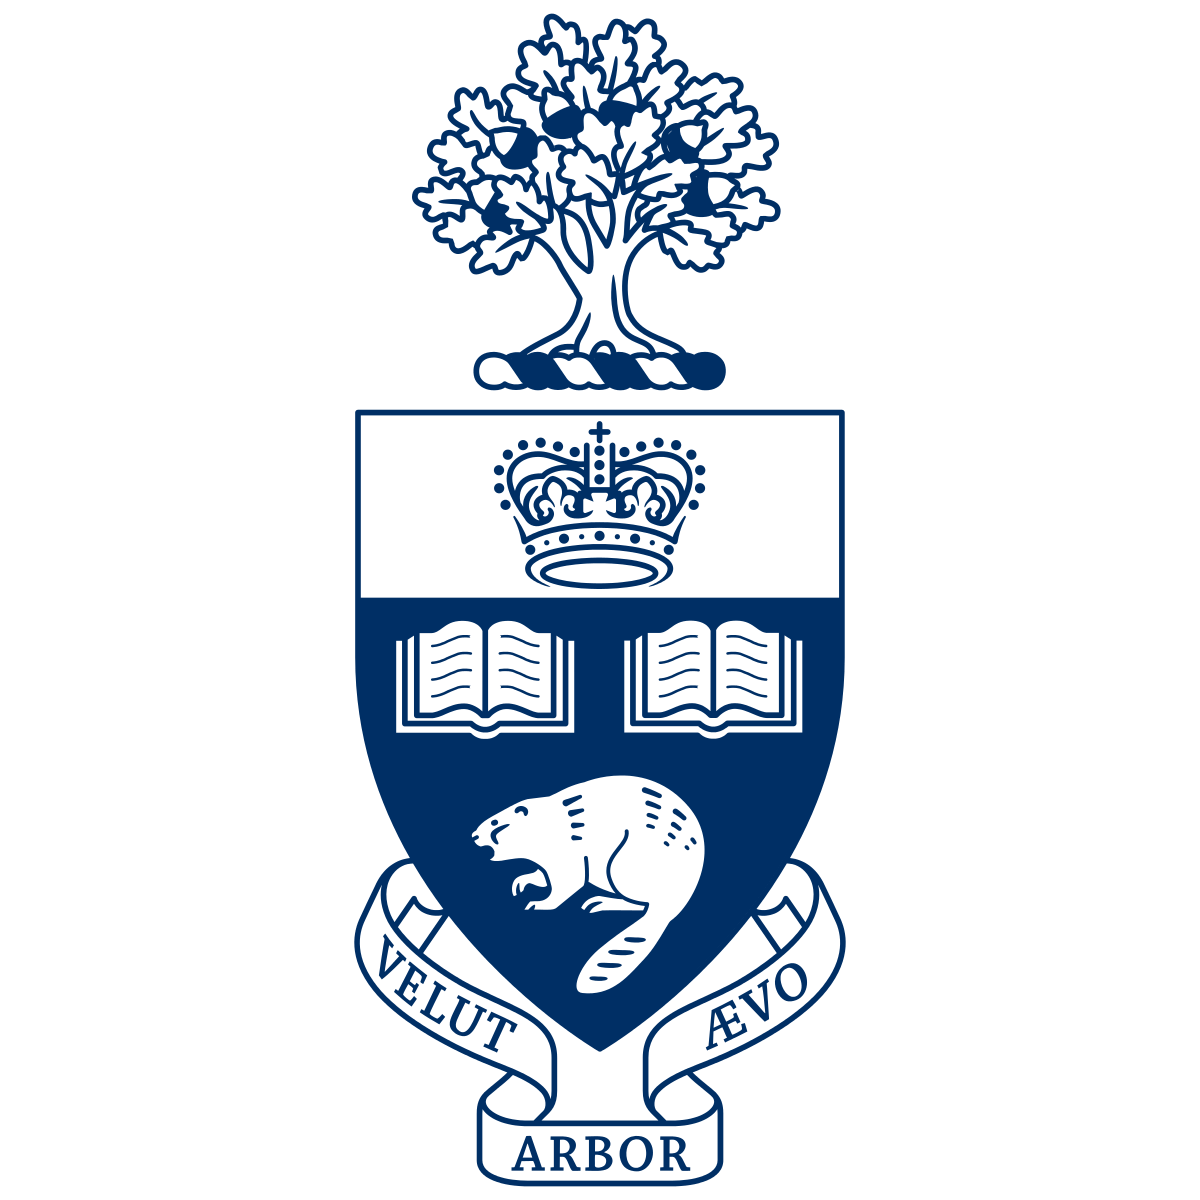 Well Known College Logo - University of Toronto